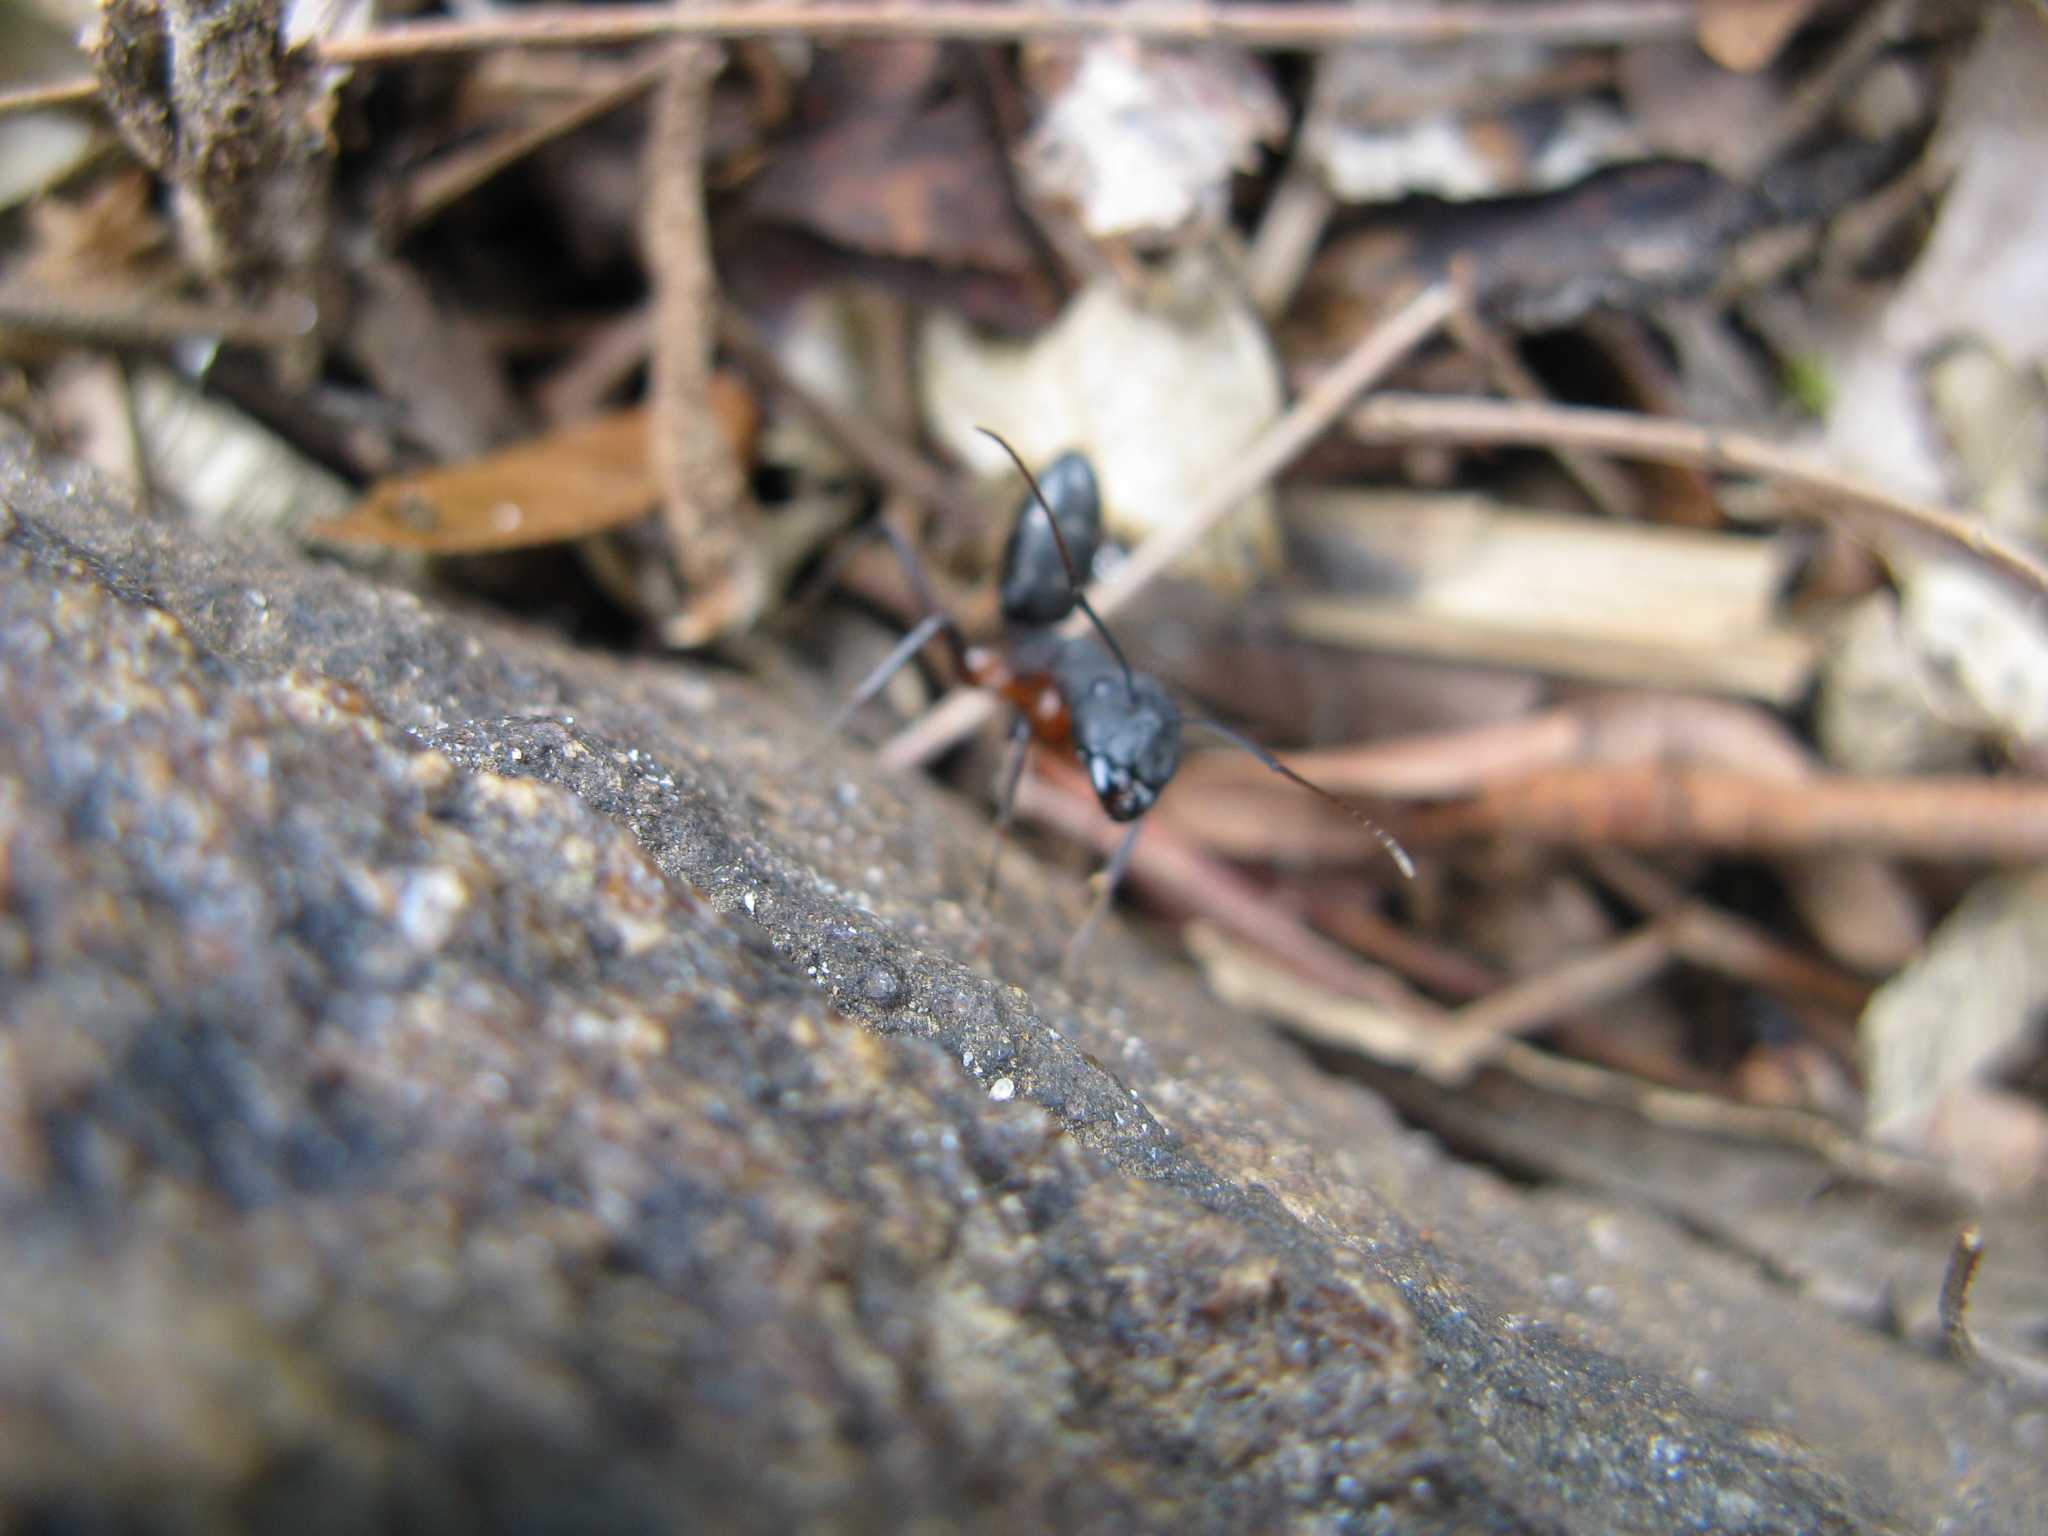 a black ant on the ground next to leaves and dried grass